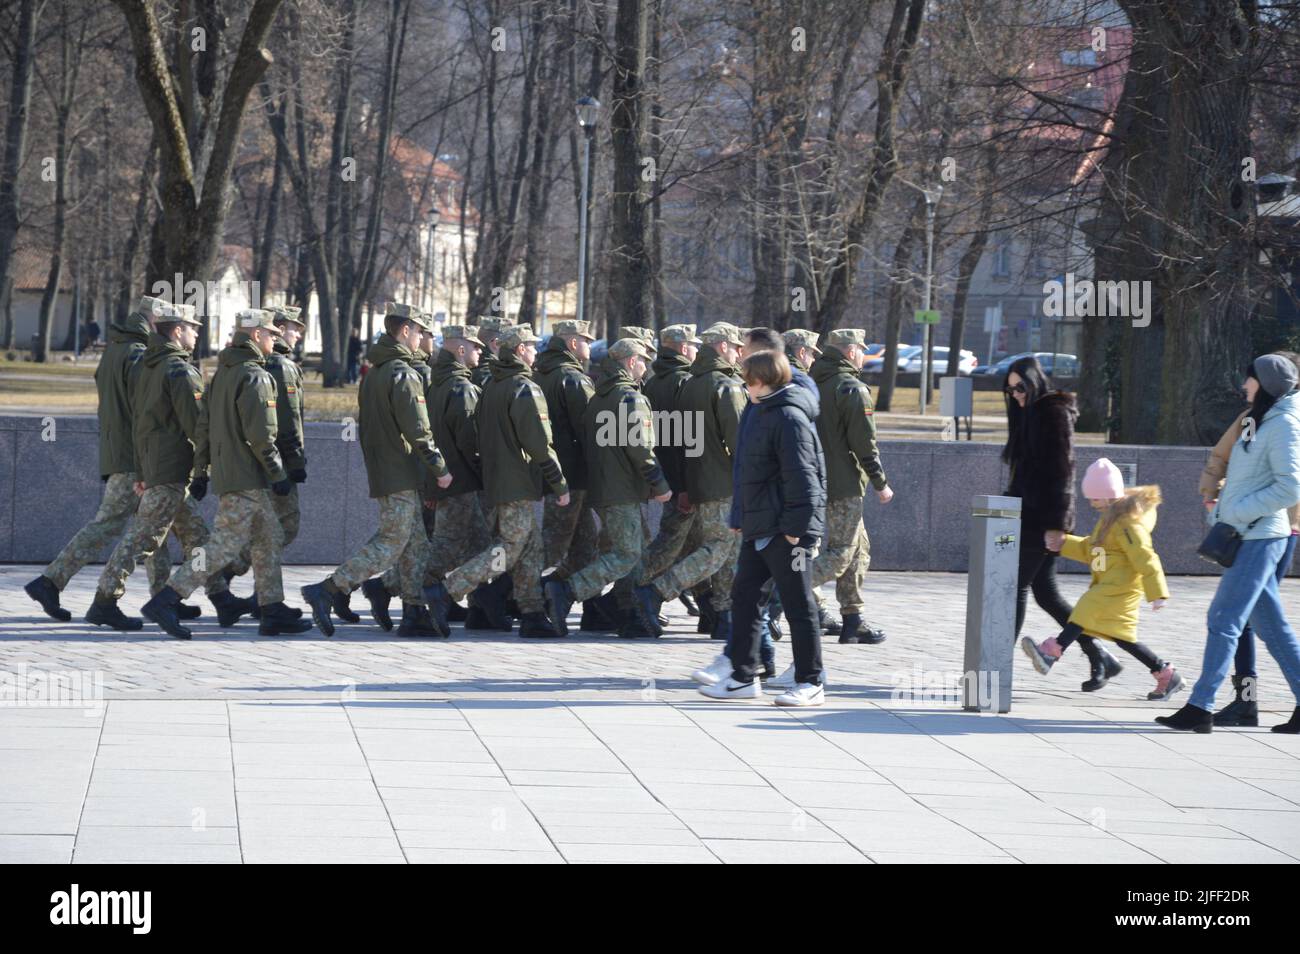 Vilnius, Lithuania - 2022 - Soldiers march at The Cathedral Square. (Photo by Markku Rainer Peltonen) Stock Photo